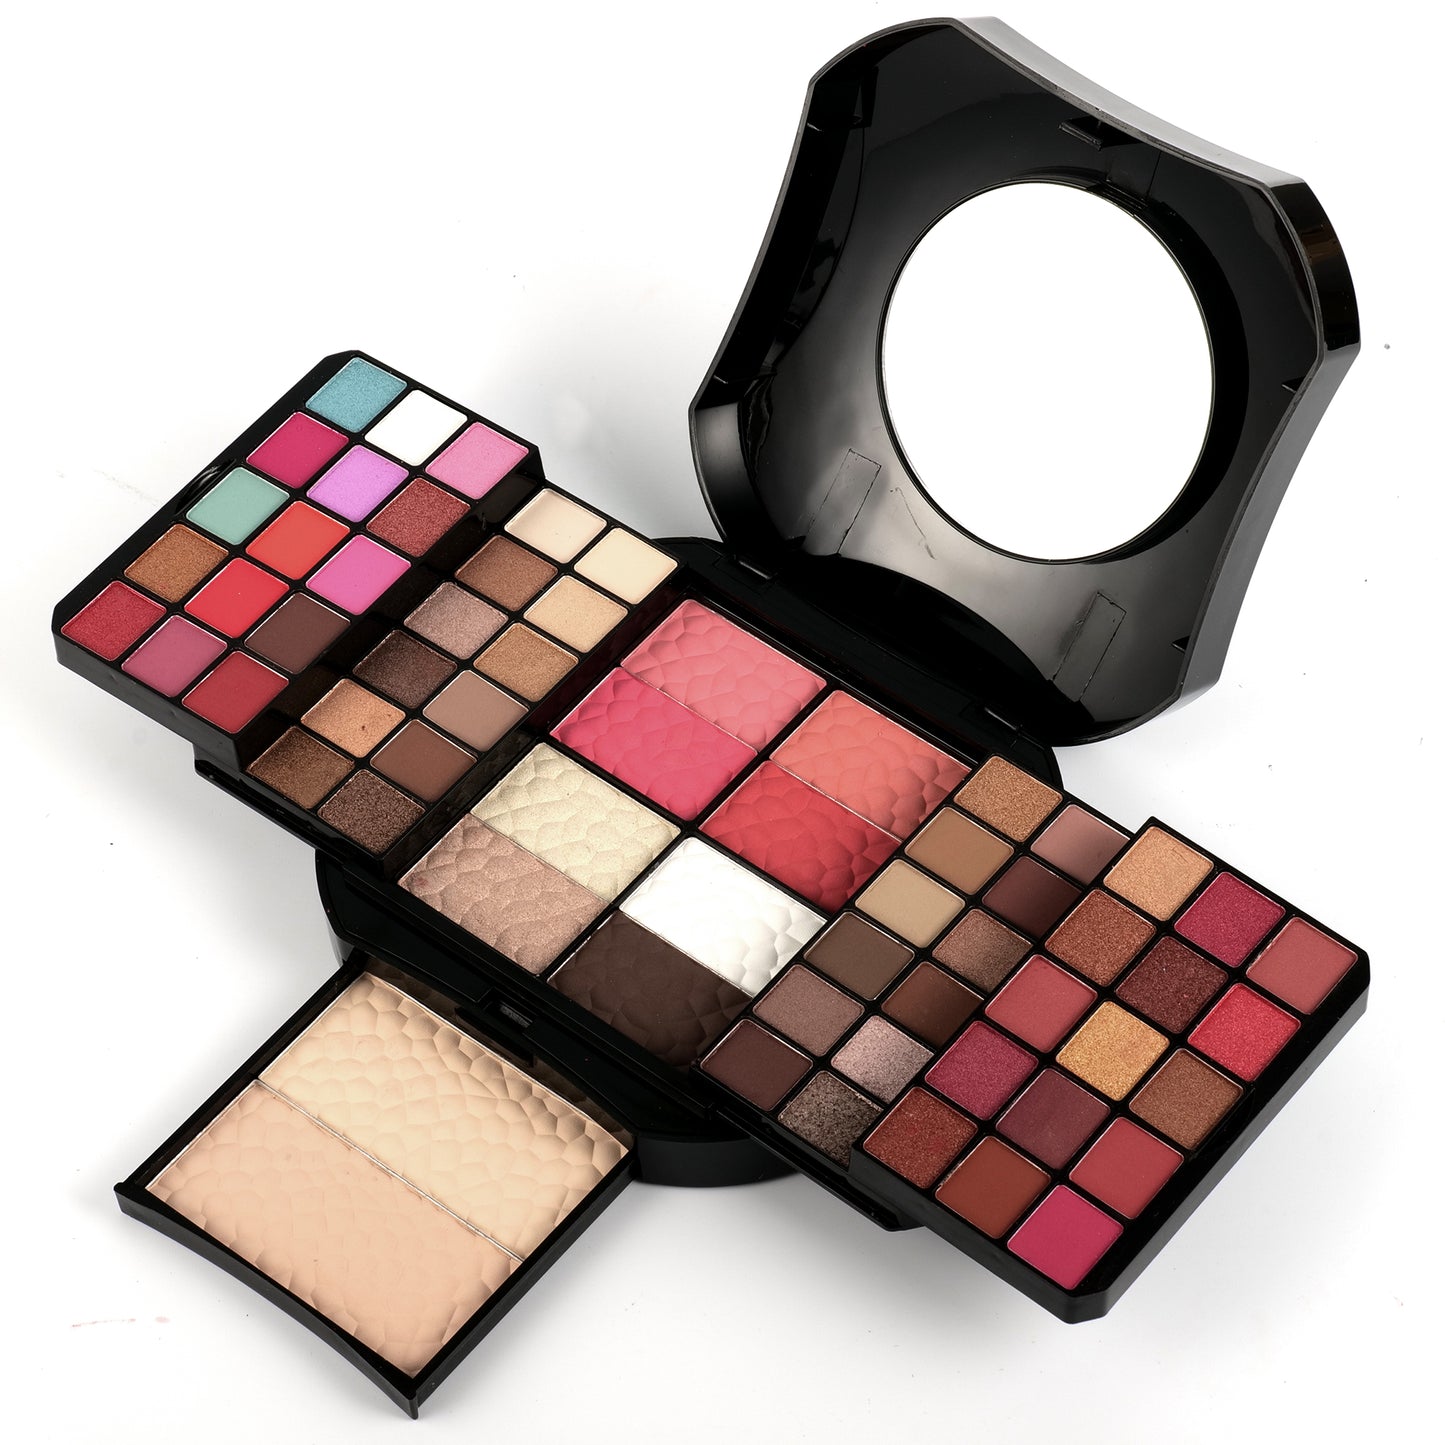 Full Makeup Kit with 54 color Eye shadow, 4 color blushers, 2 color highlighter, 2 color face powder, 2 color bronzers, all in one makeup set